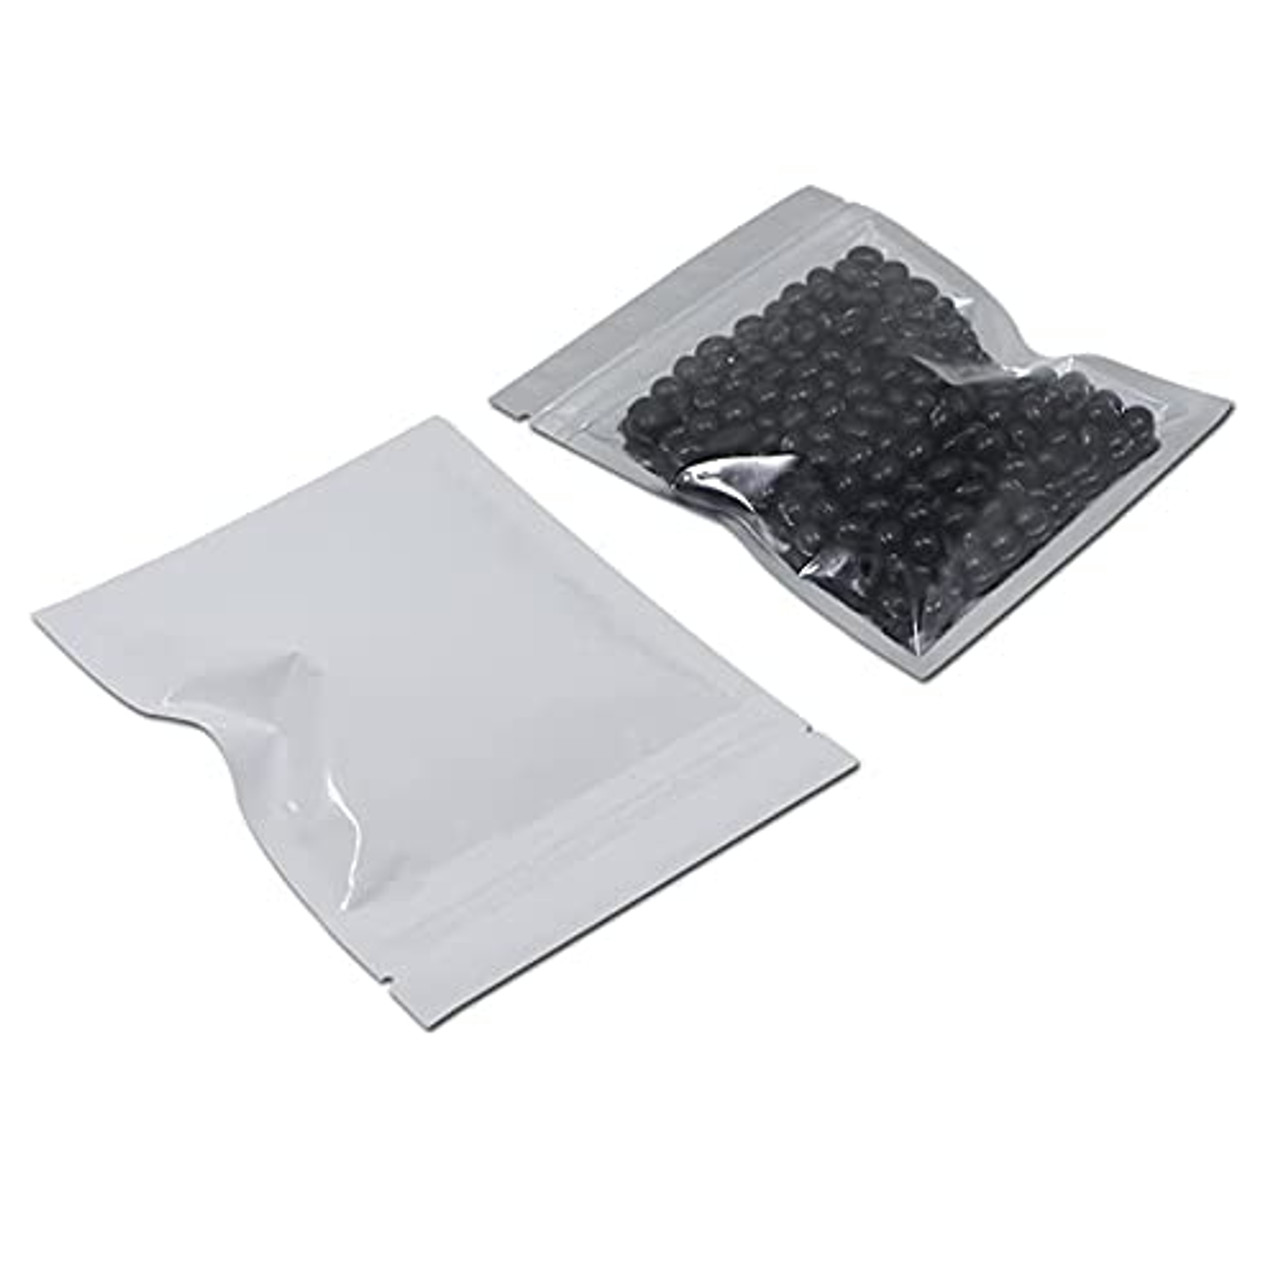  100 Count Mylar Heat Seal Bags - White and Clear Mylar Vacuum Seal  Bags - Food Grade Sealable Bags for Packaging and Samples - Small Flat  Sample Bags Sealable With Tear